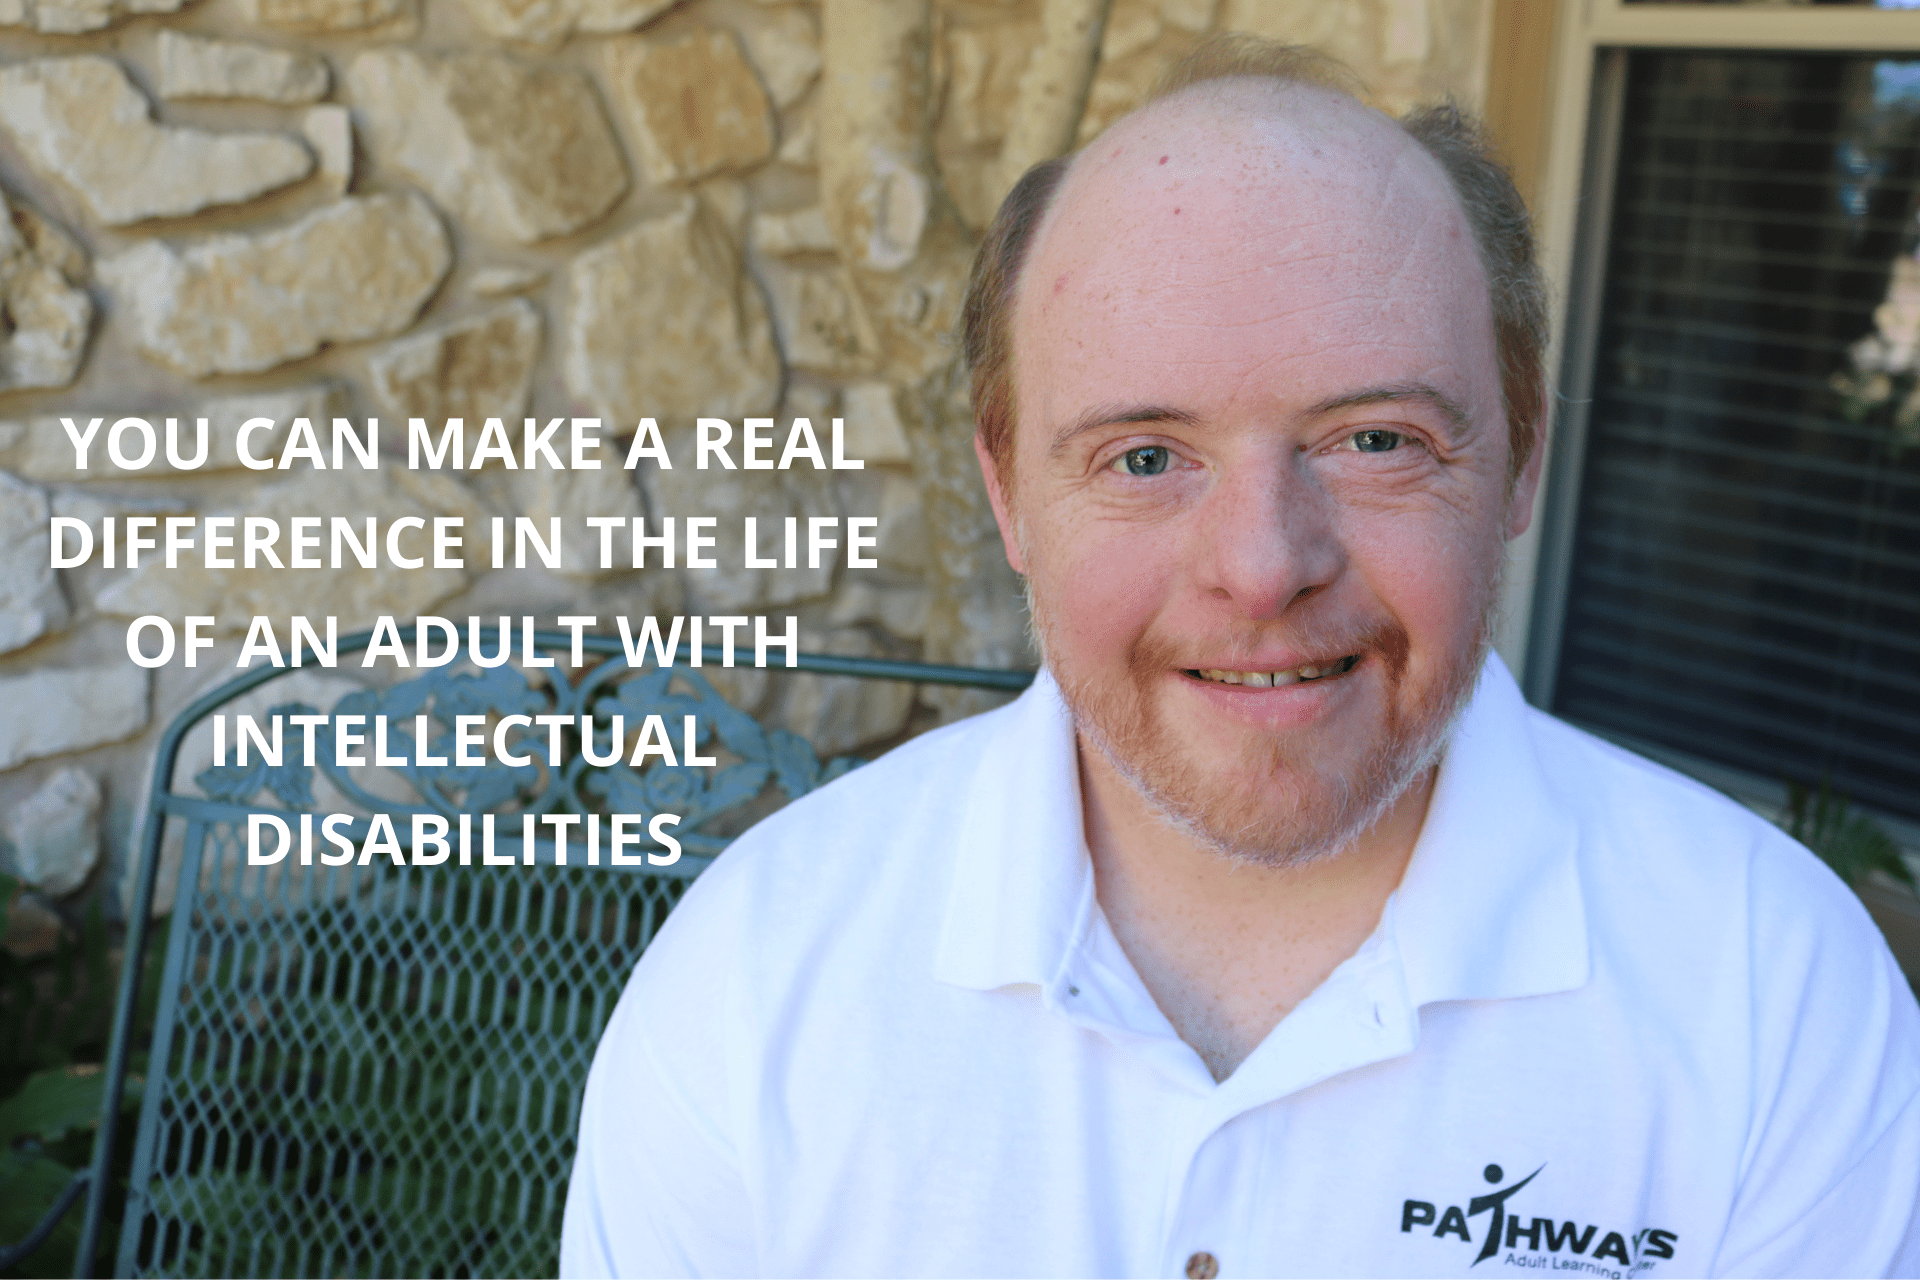 YOU CAN MAKE A REAL DIFFERENCE IN THE LIFE OF AN ADULT WITH INTELLECTUAL DISABILITIES